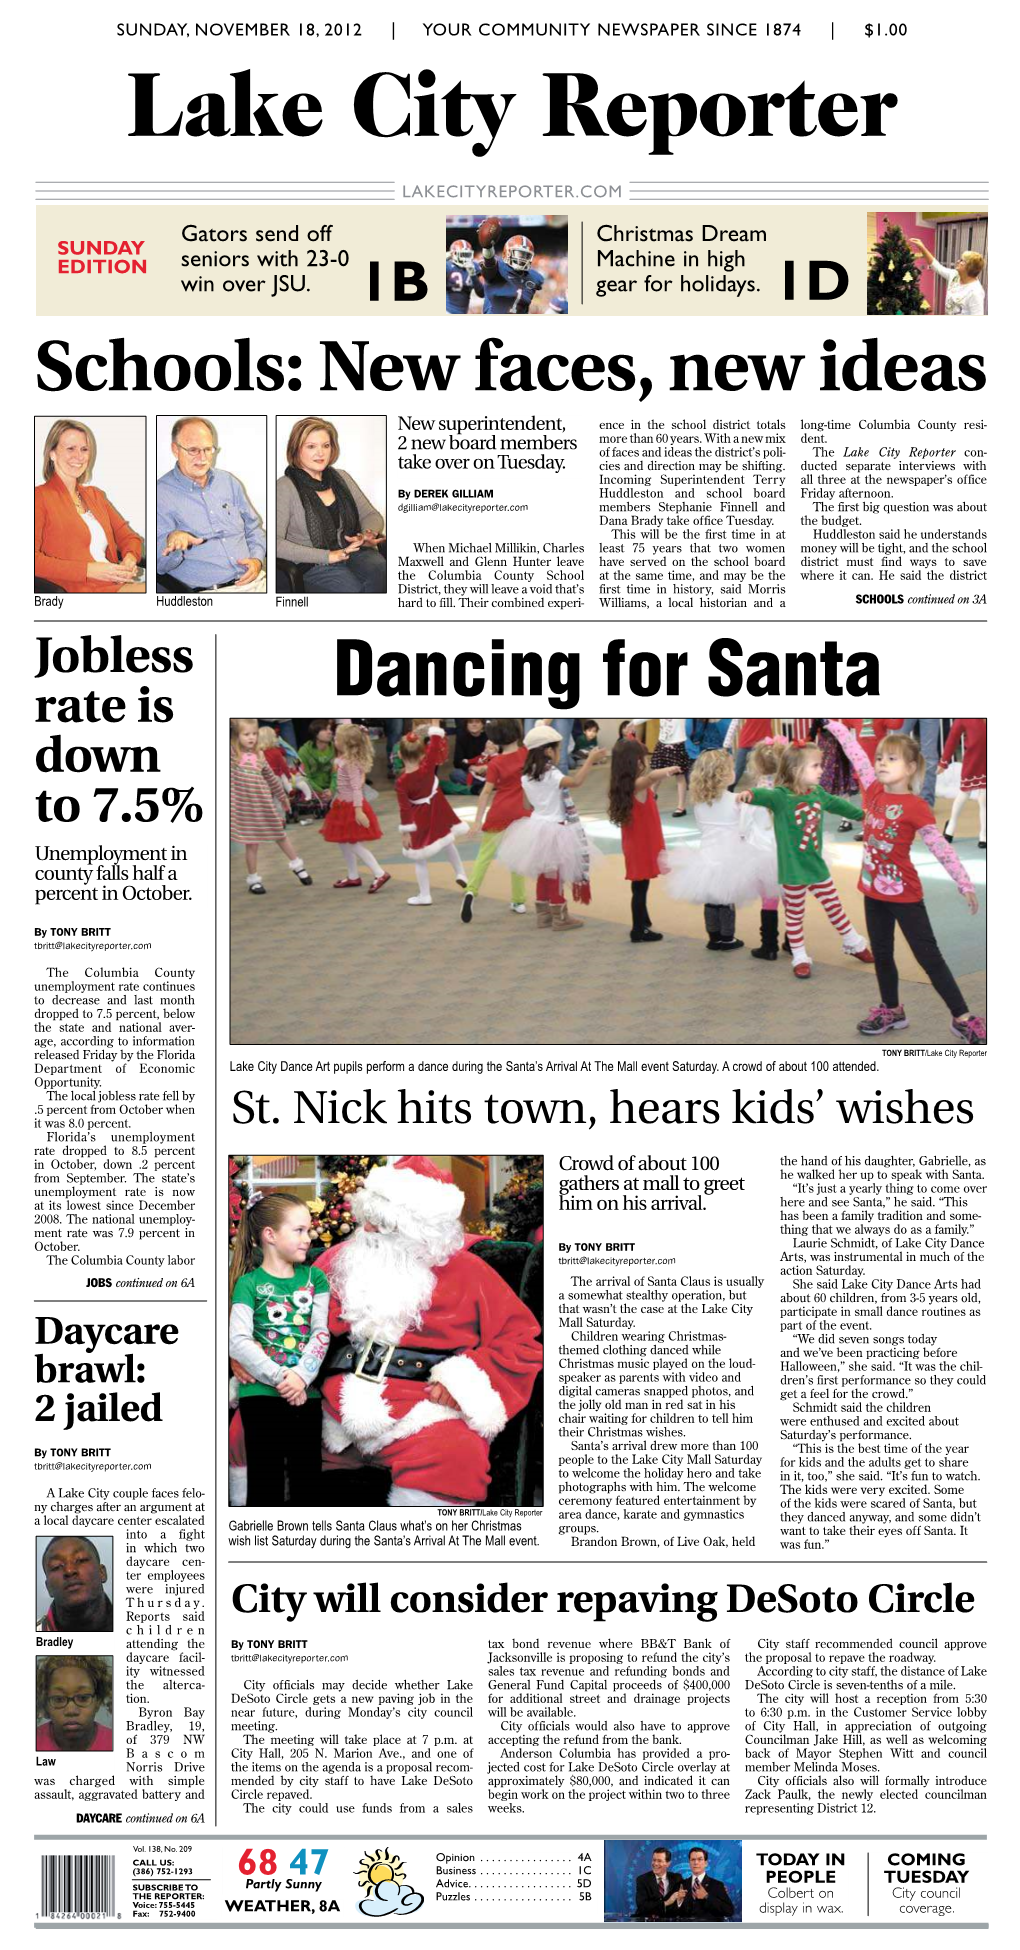 Dancing for Santa Down to 7.5% Unemployment in County Falls Half a Percent in October